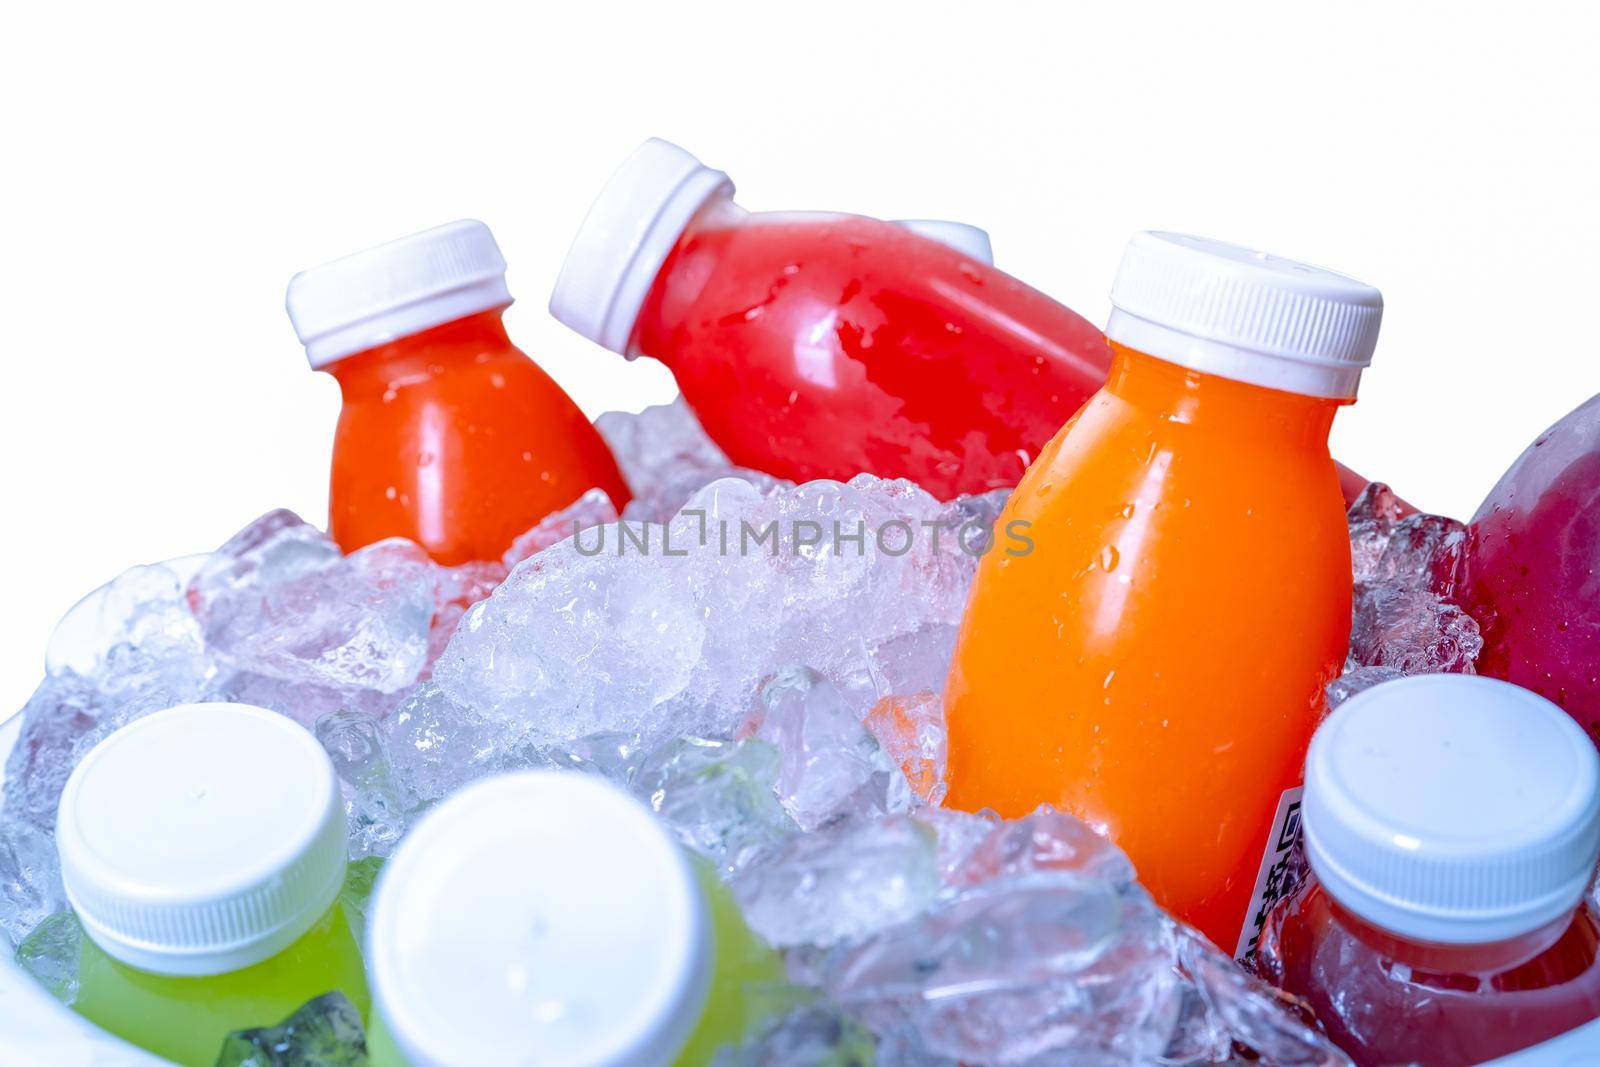 Organic cold pressed raw vegetable and fruit juice bottle in crushed ice bucket on white background. Healthy drink. Trendy juice beverage. Detox juice from fresh fruits and vegetables. Orange juice.